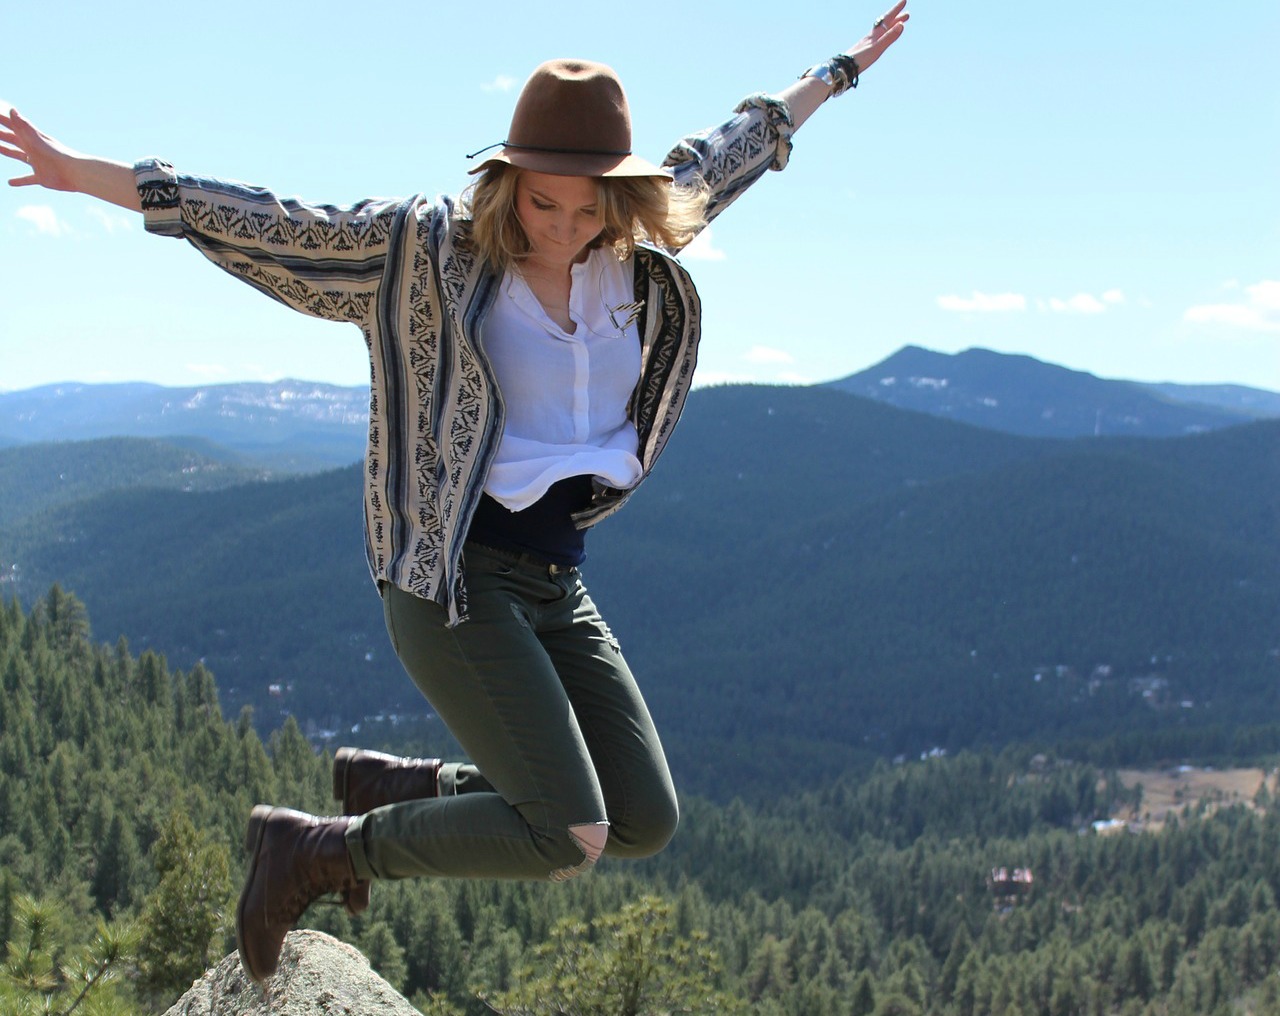 5 Simple Ways to Feel More Confident Every Day